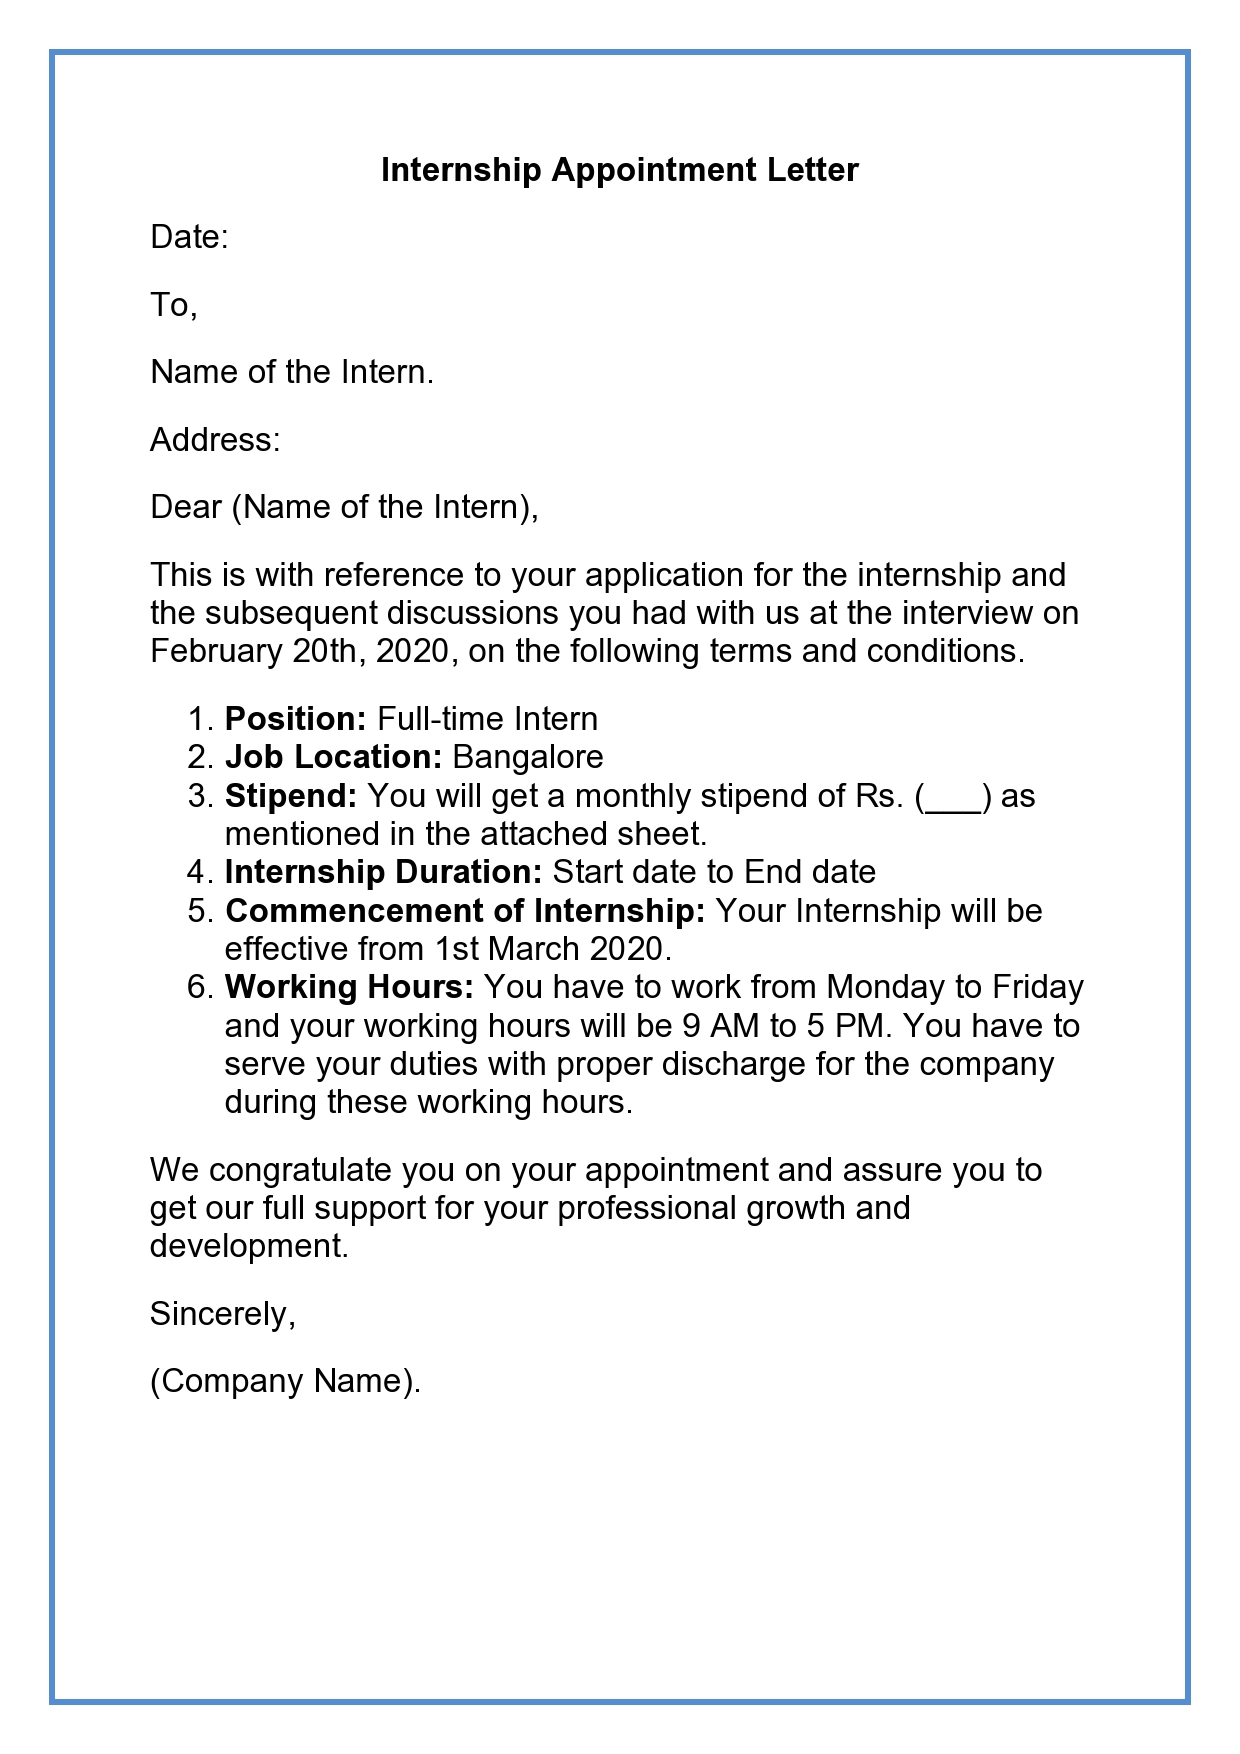 Internship Appointment Letter